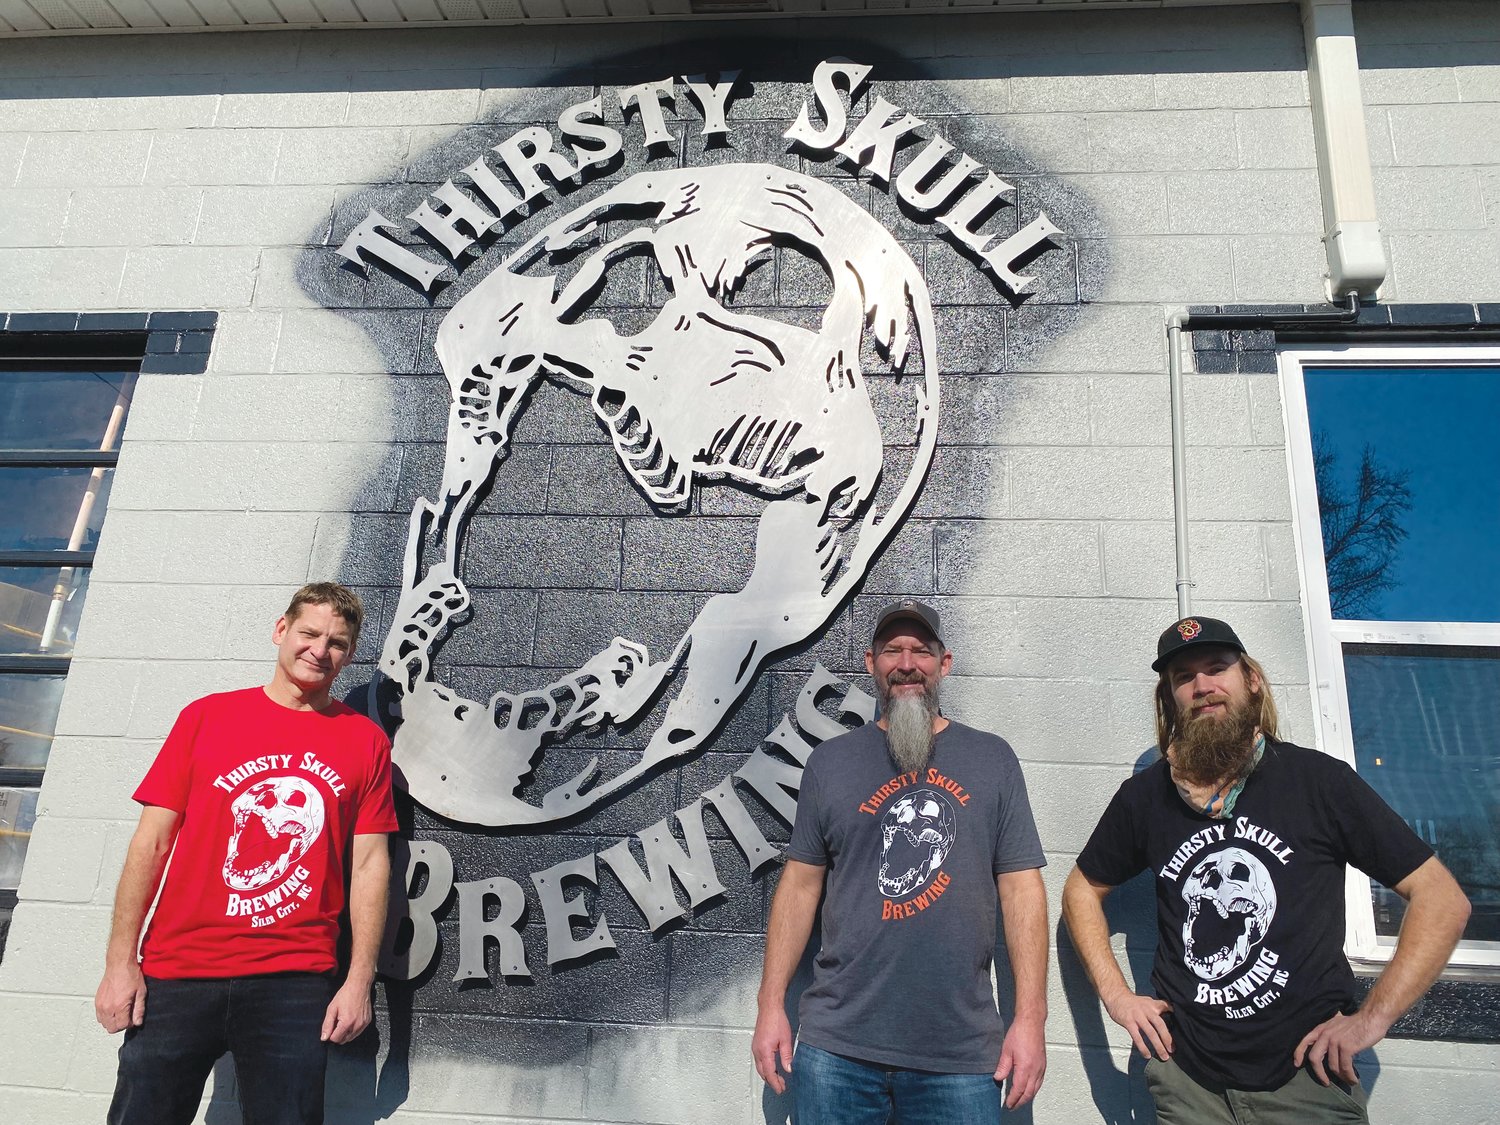 Thirsty Skull Brewing is located on 915 N. 2nd Ave in Siler City. Co-owners Chris Hackney, Eric Stevens, Brandon Russell and Steve Russell opened the taproom to customers on Dec. 3.